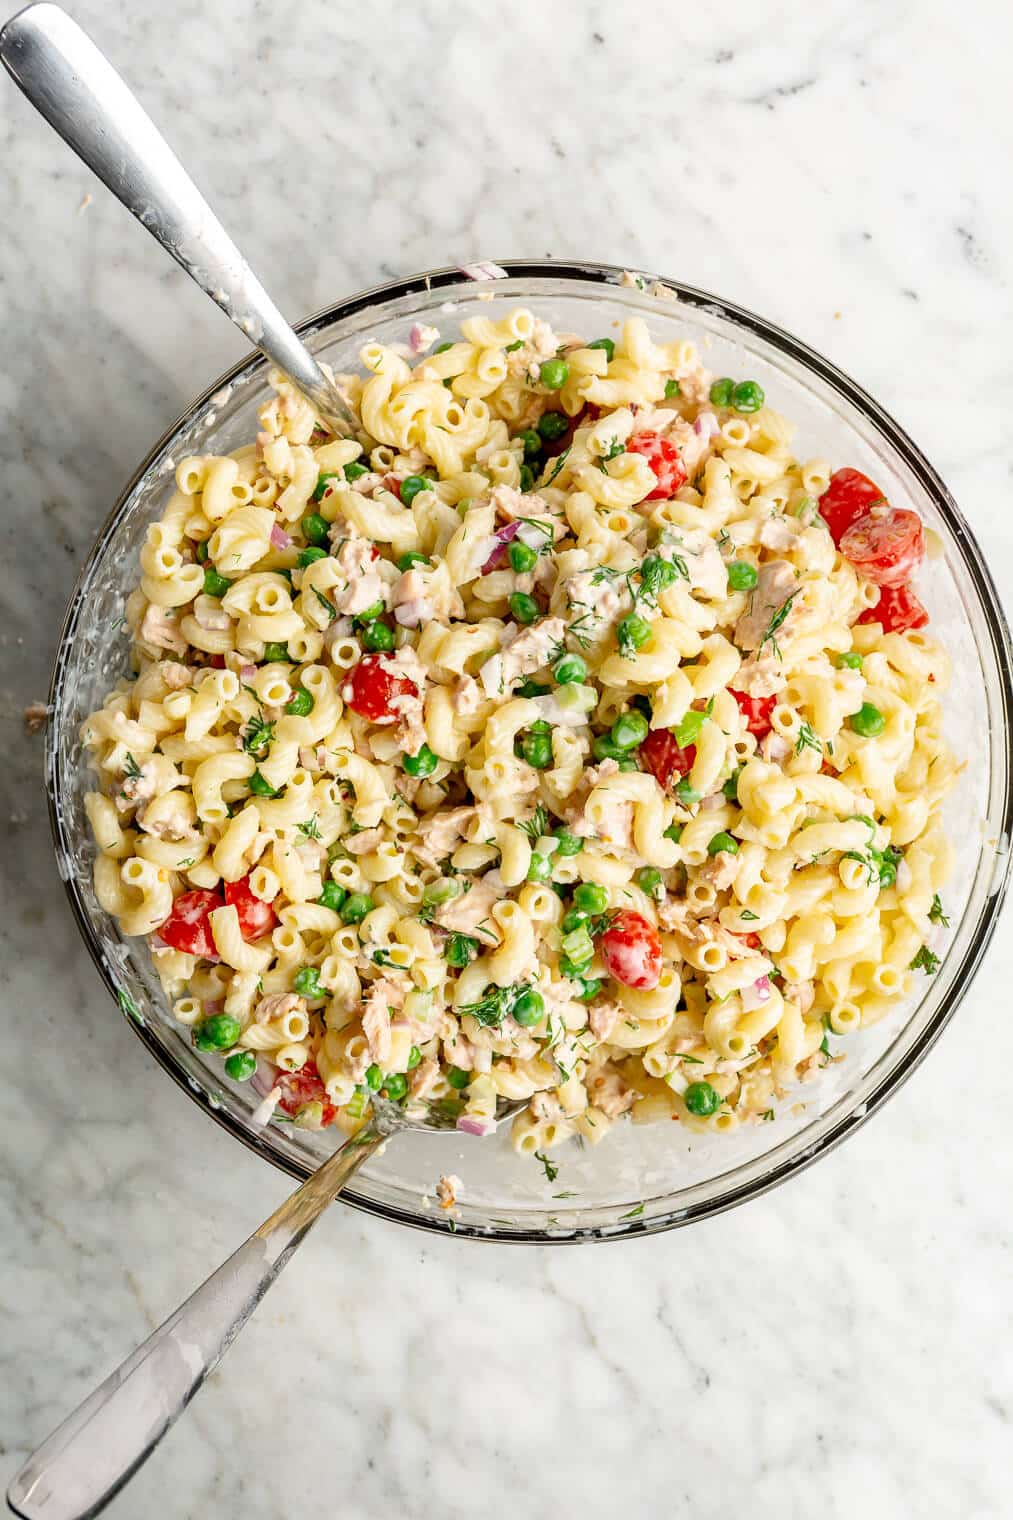 Two spoons in a large bowl of tuna pasta salad.